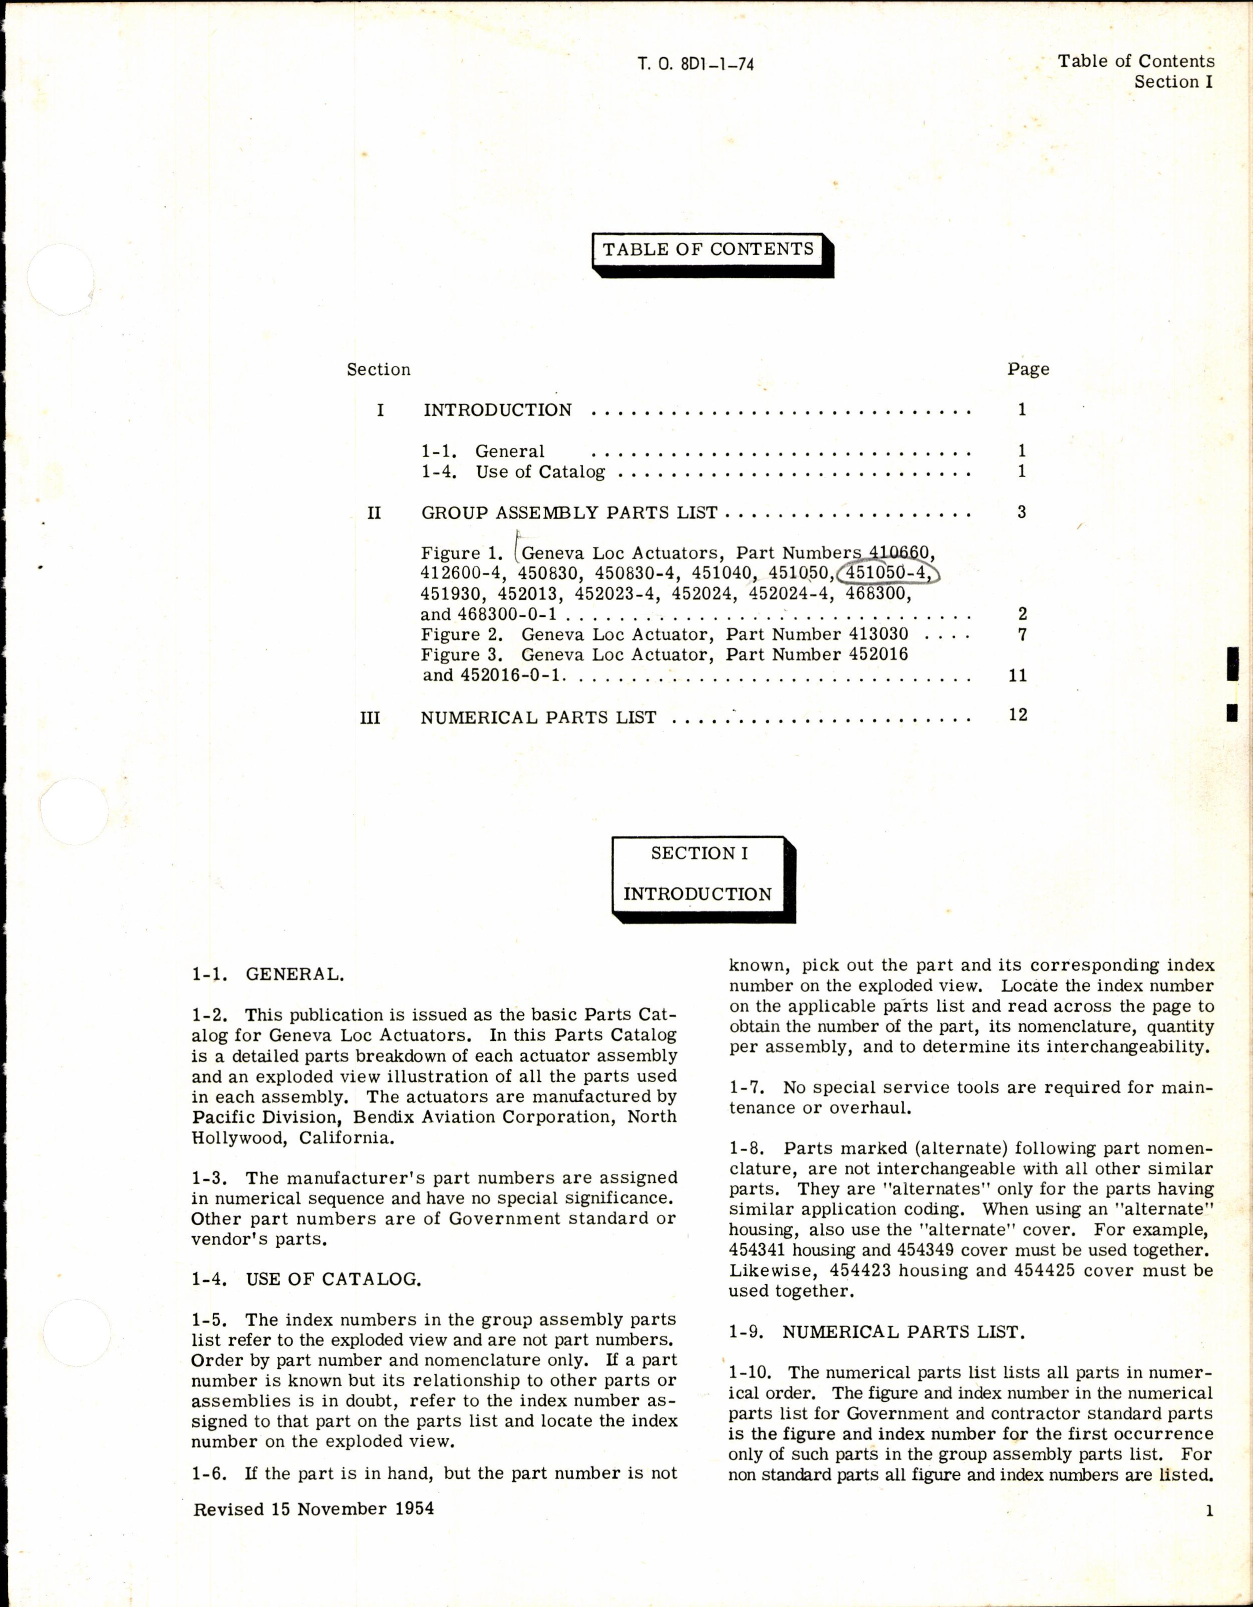 Sample page 3 from AirCorps Library document: Parts Catalog for Geneva Loc Actuators